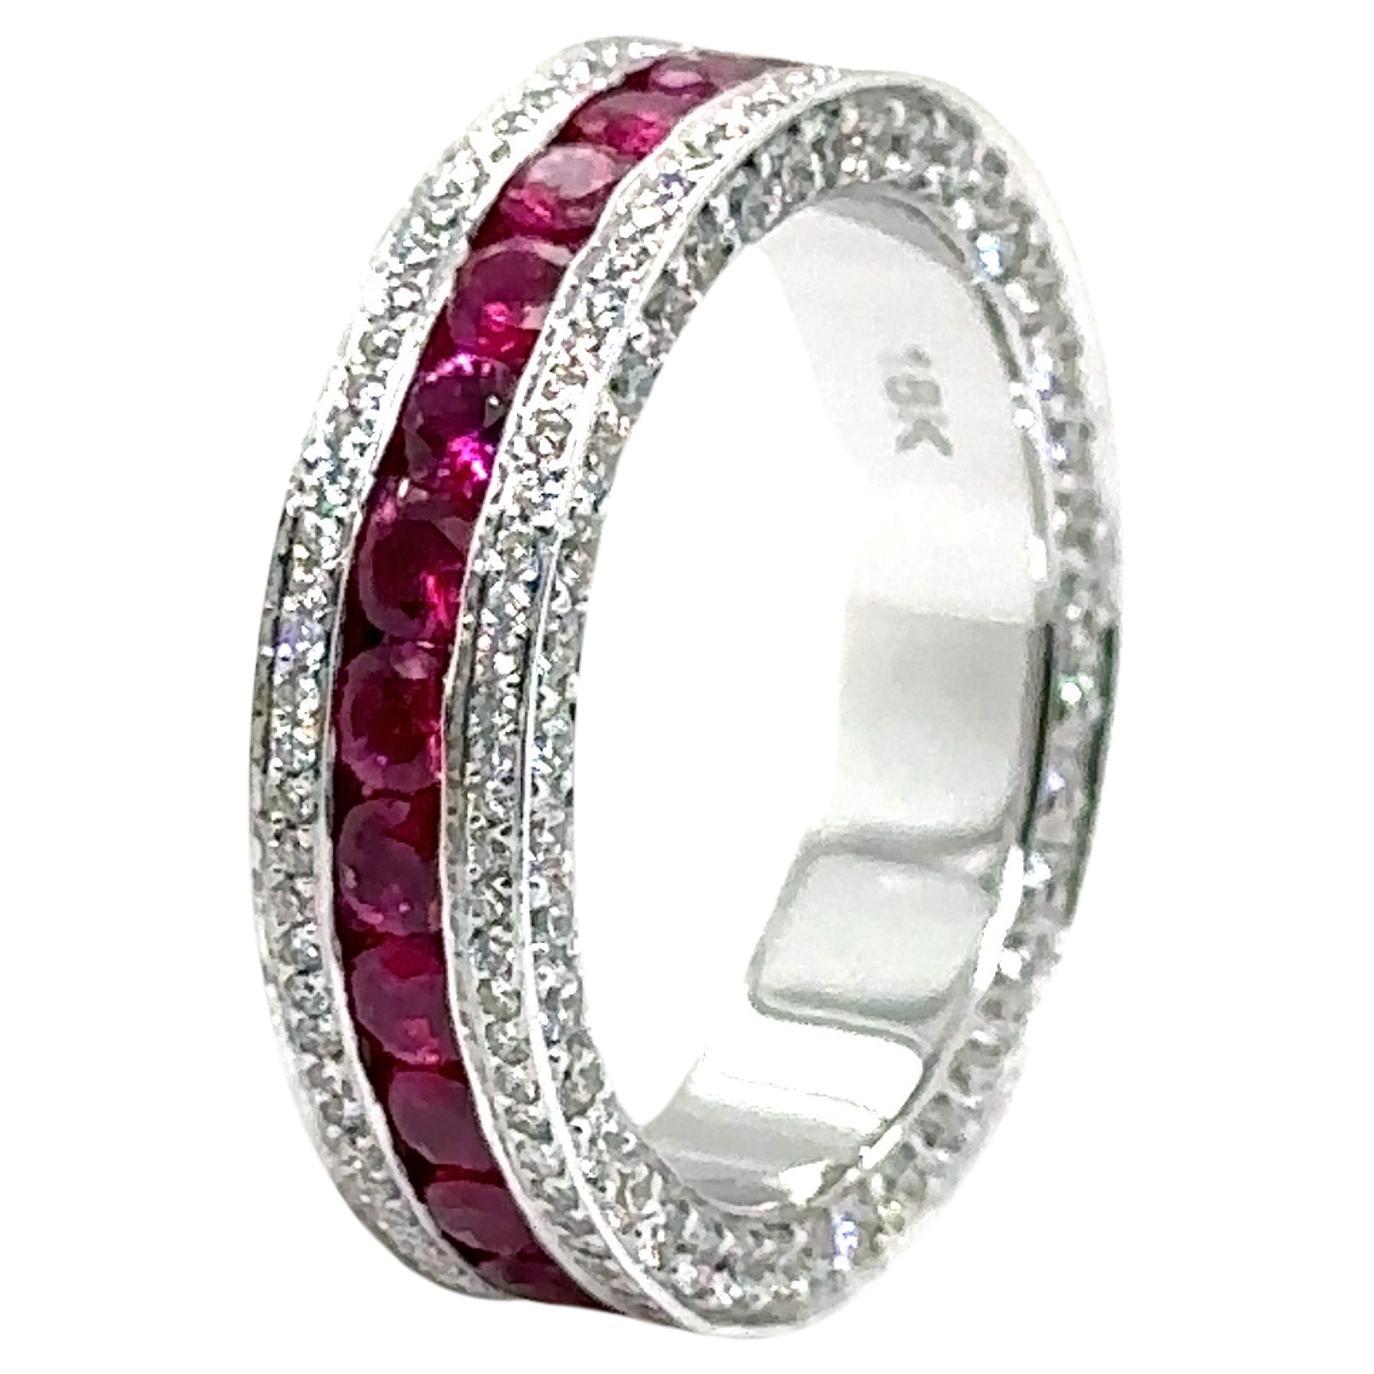 RTR004-RUBY - 18K WHITE GOLD WEDDING BAND With RUBY & DIAMONDS  For Sale